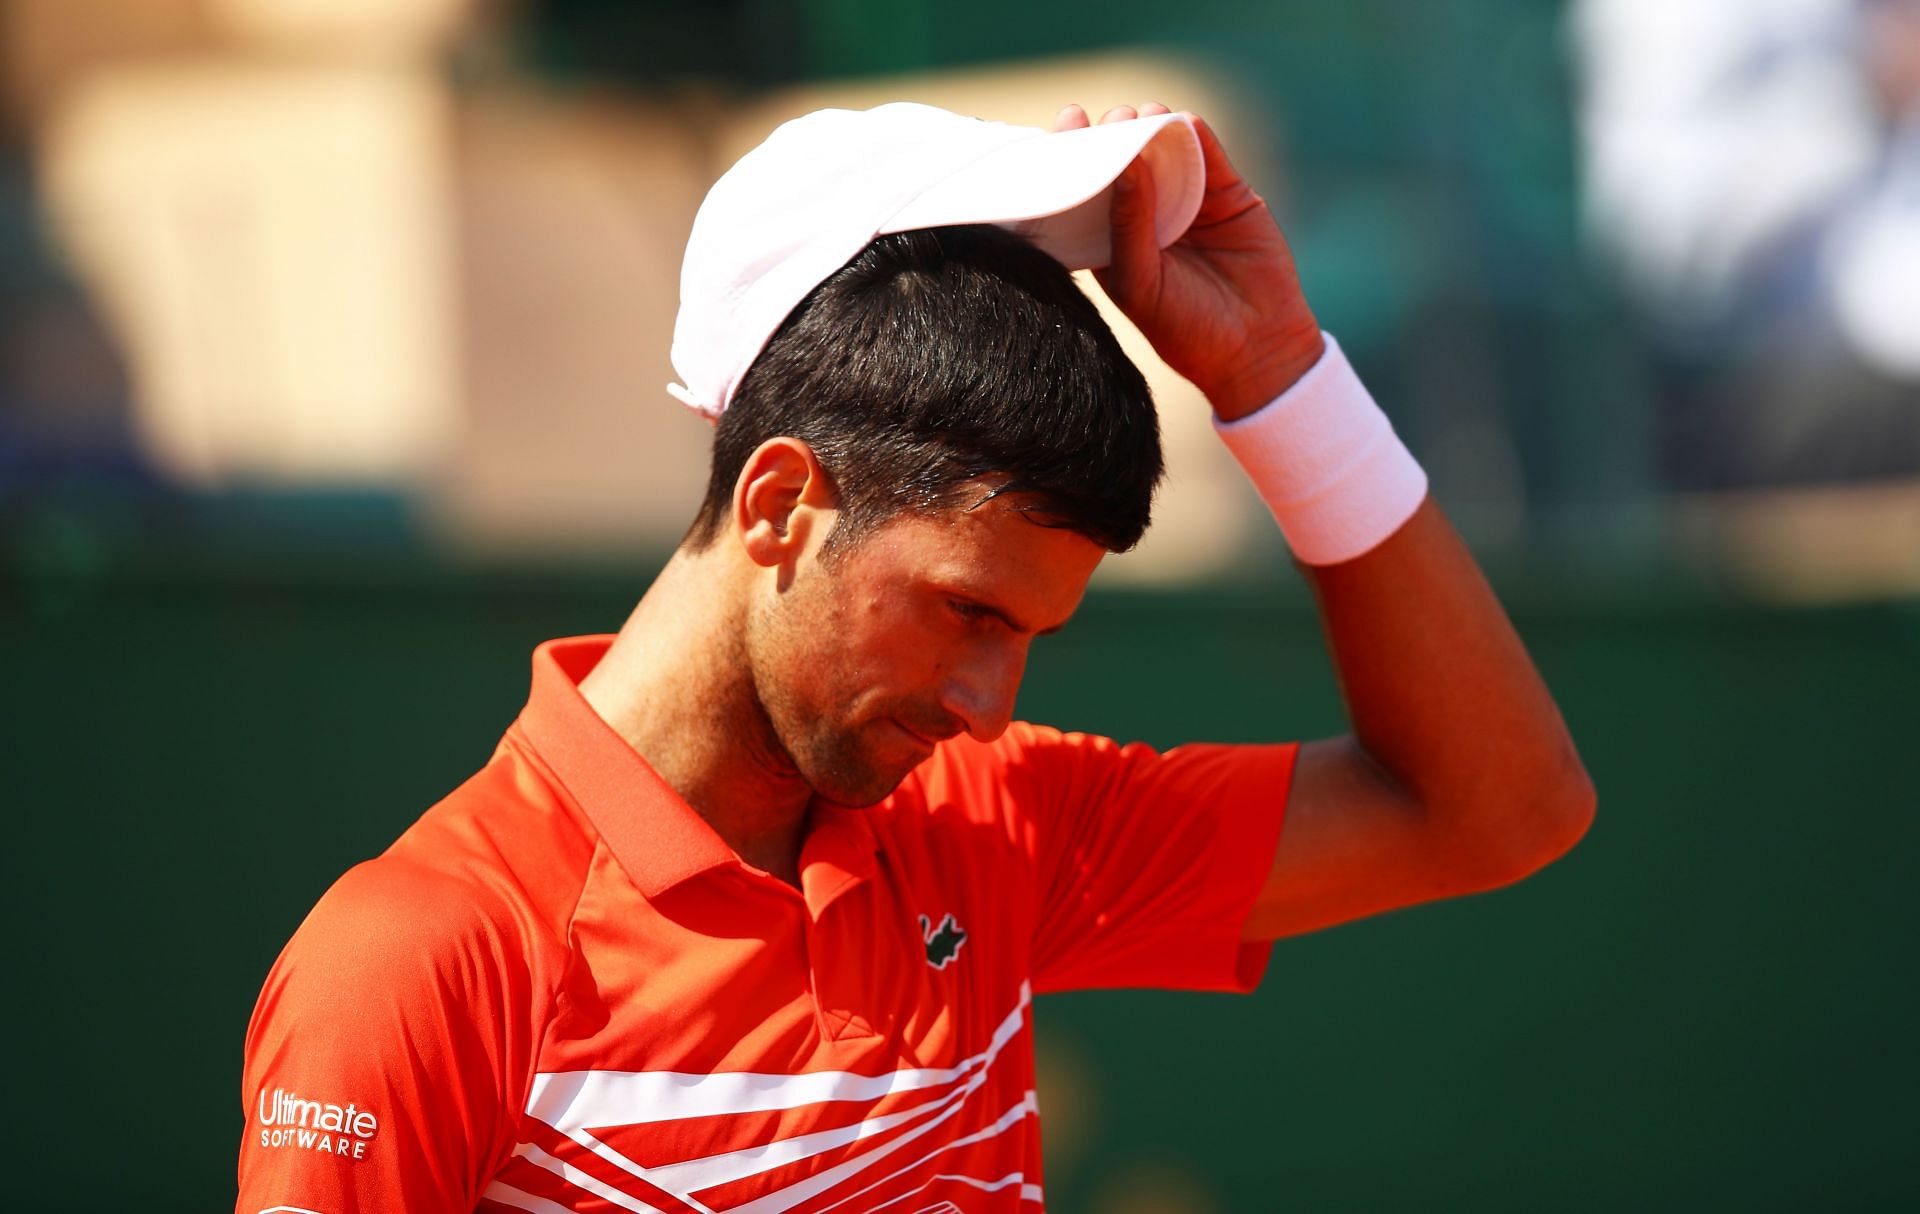 The World No. 1 at the Monte Carlo Masters